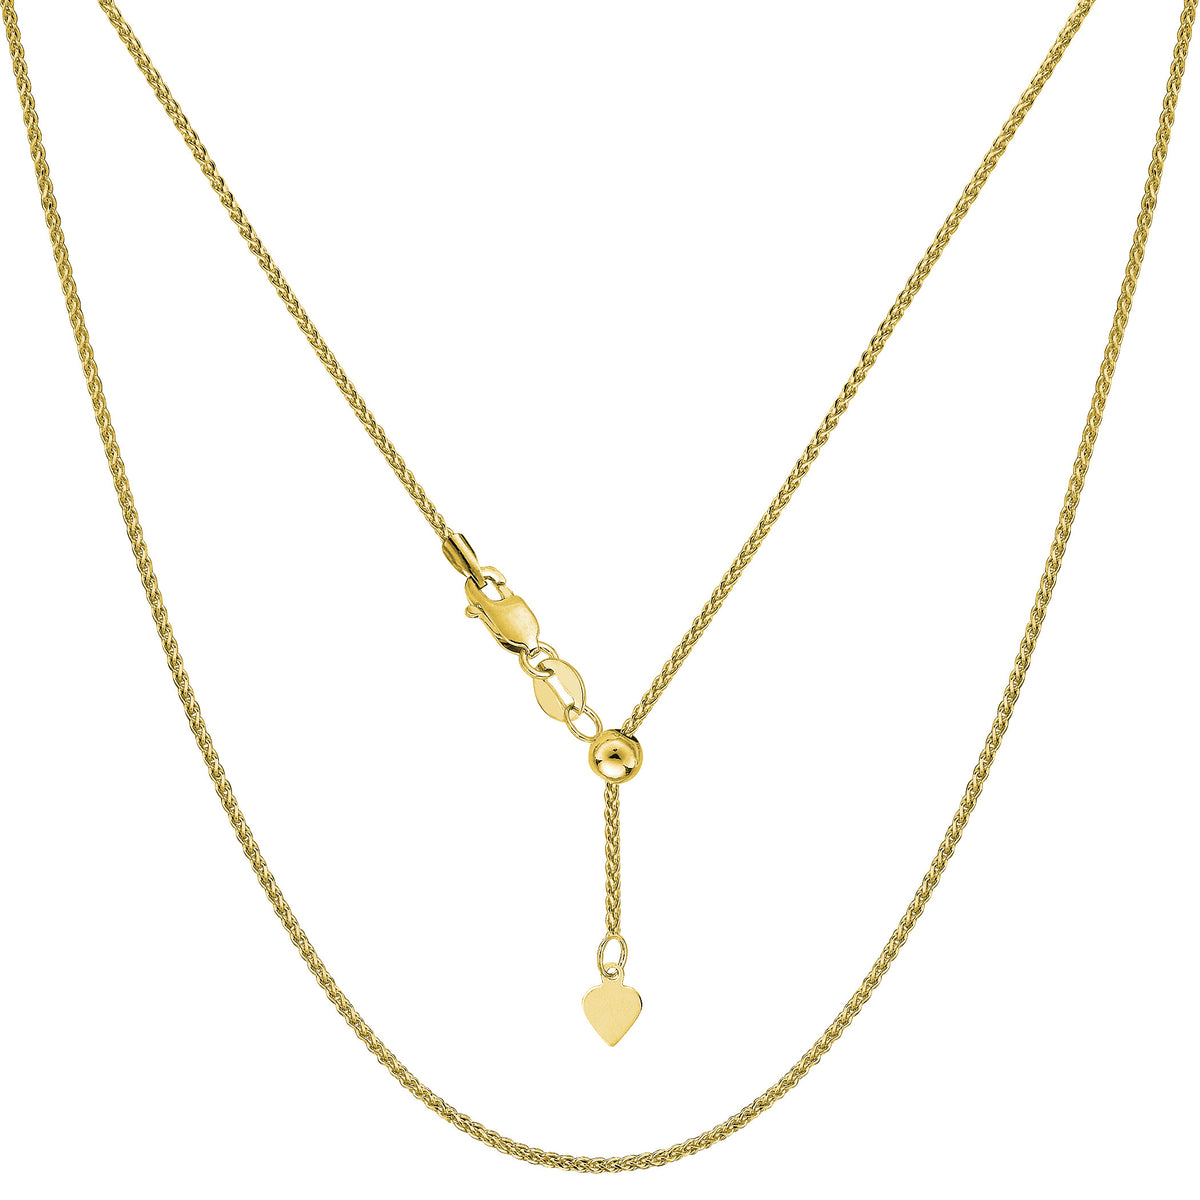 10k Yellow Gold Adjustable Wheat Link Chain Necklace, 1.0mm, 22" fine designer jewelry for men and women